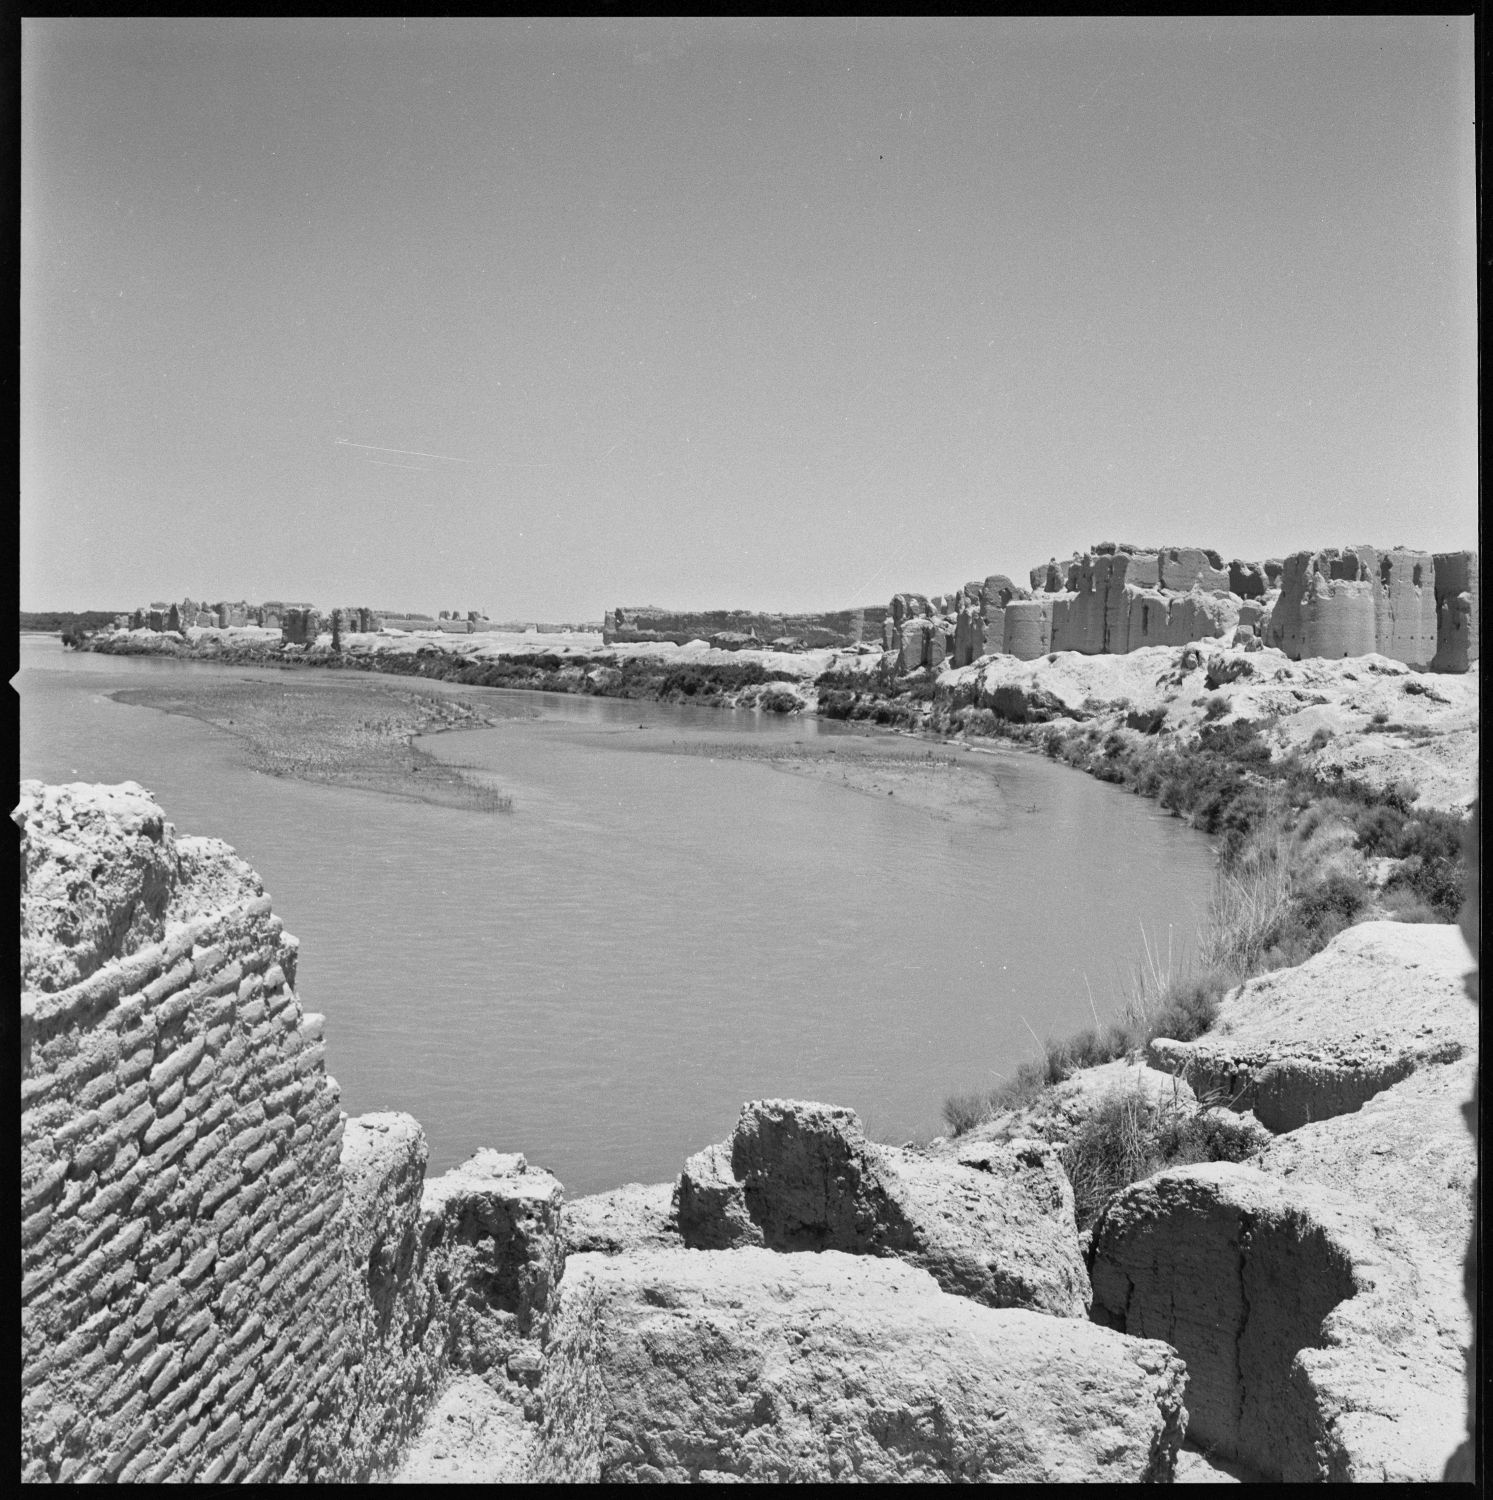 View from South Palace looking towards North along Helmand River. The ruins of the Central Palace are visible at right, and the North Palace is barely visible in background.